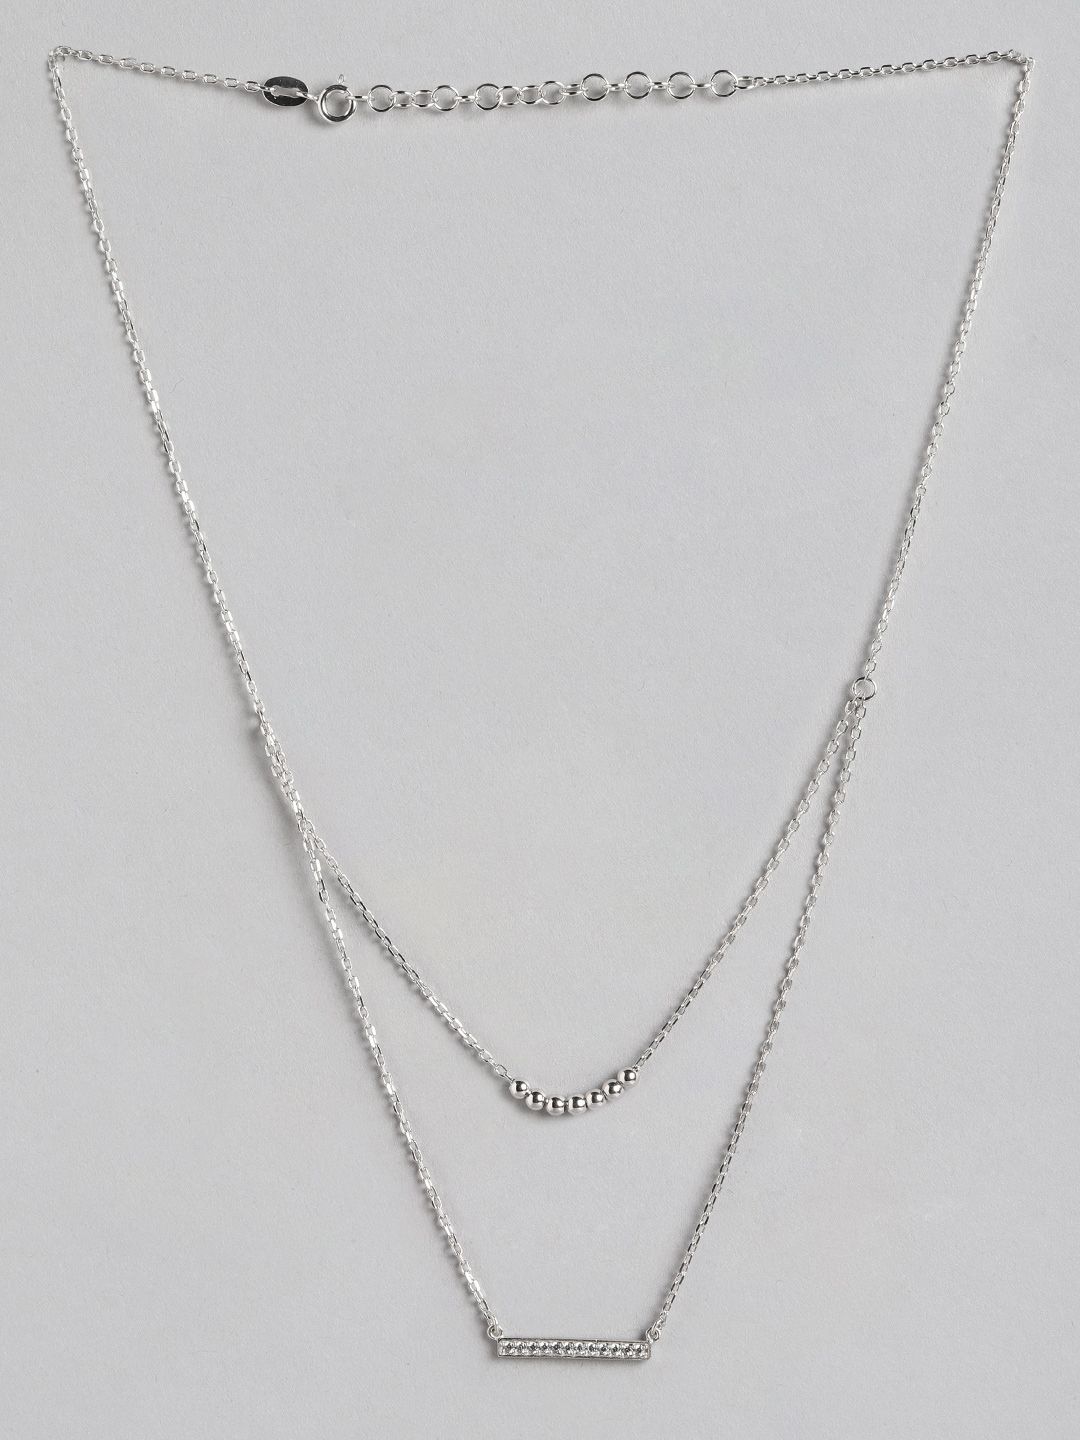 Carlton London Silver-Toned Brass Rhodium-Plated Layered Necklace Price in India